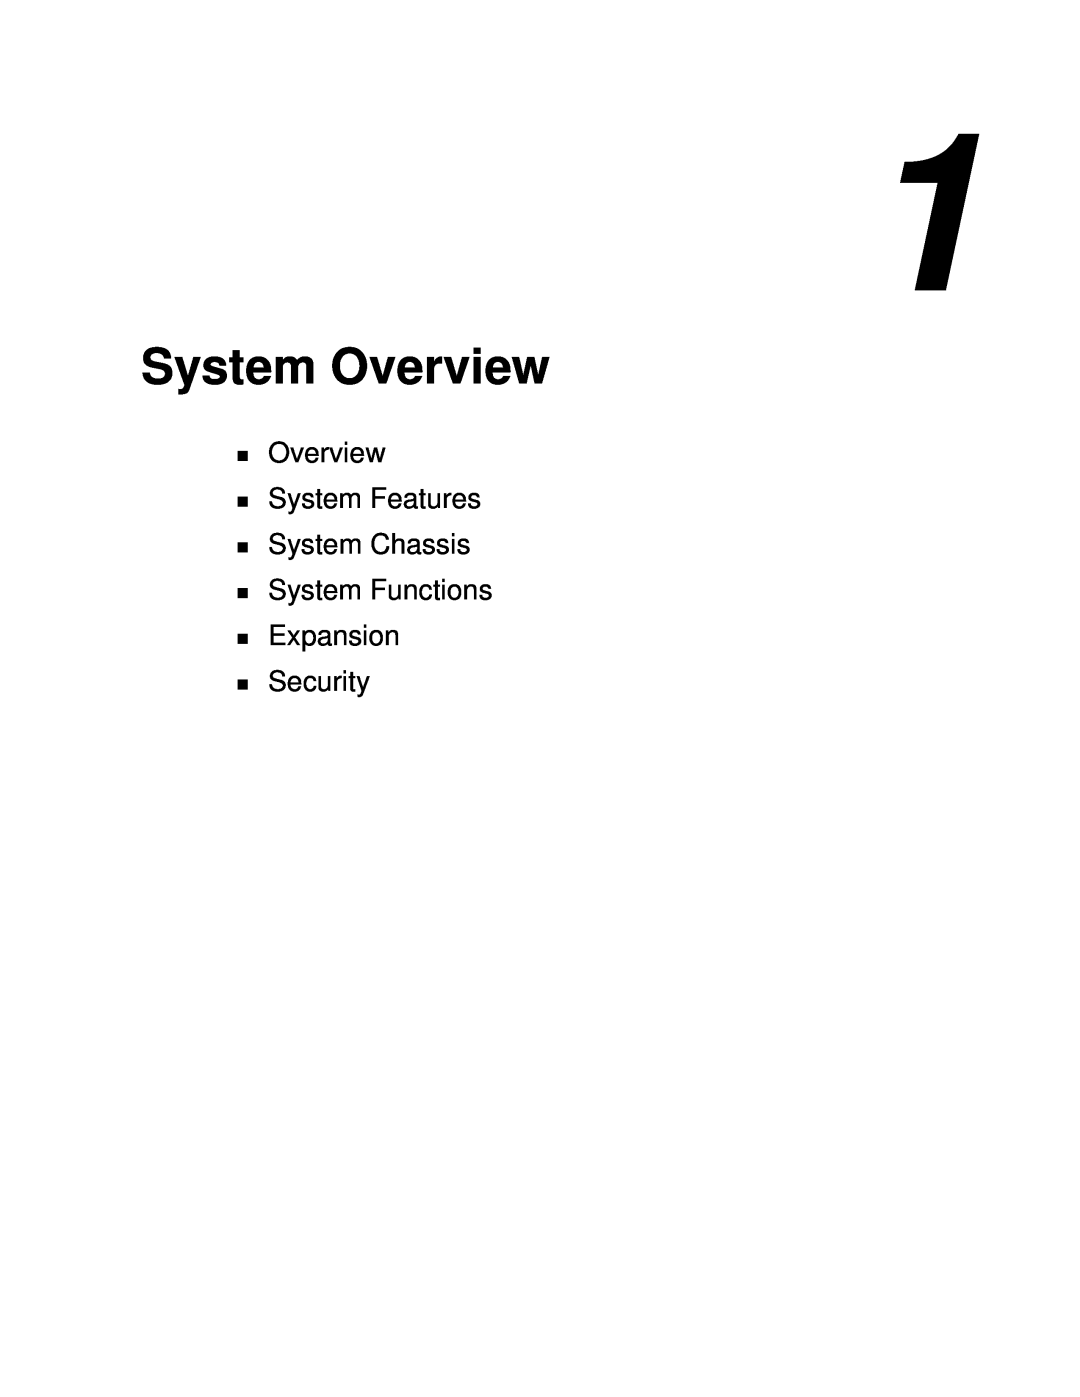 NEC 1080Xd manual System Overview, Overview System Features System Chassis System Functions Expansion, Security 